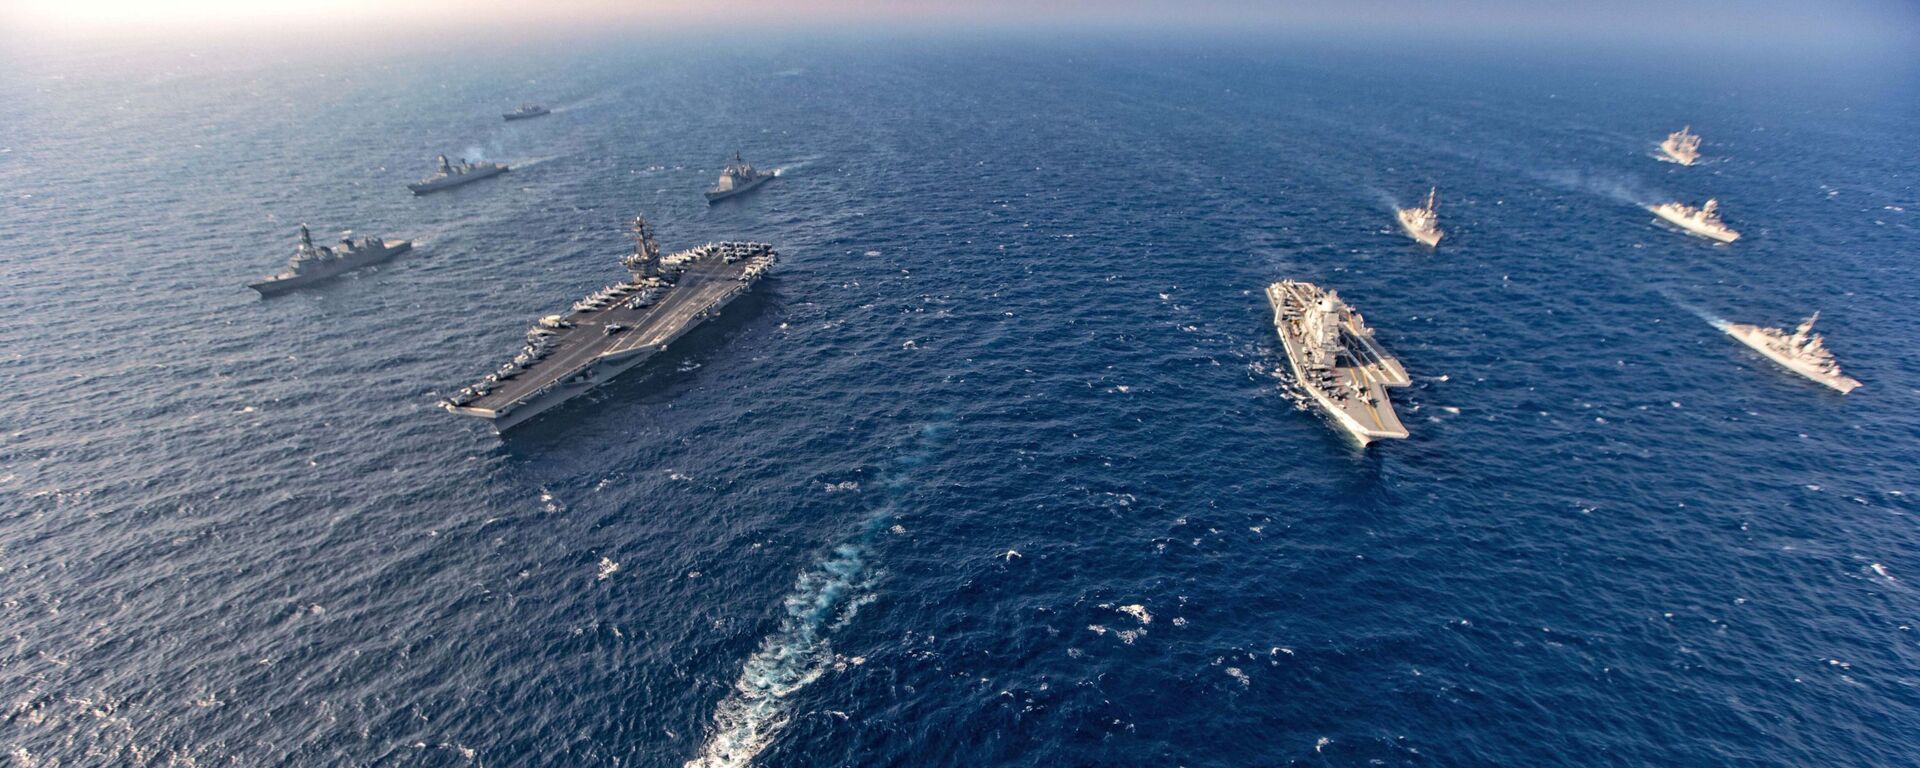 Aircraft carriers and warships participate in the second phase of Malabar naval exercise, a joint exercise comprising of India, US, Japan and Australia, in the Northern Arabian Sea on Tuesday, Nov. 17, 2020. - Sputnik International, 1920, 26.08.2021